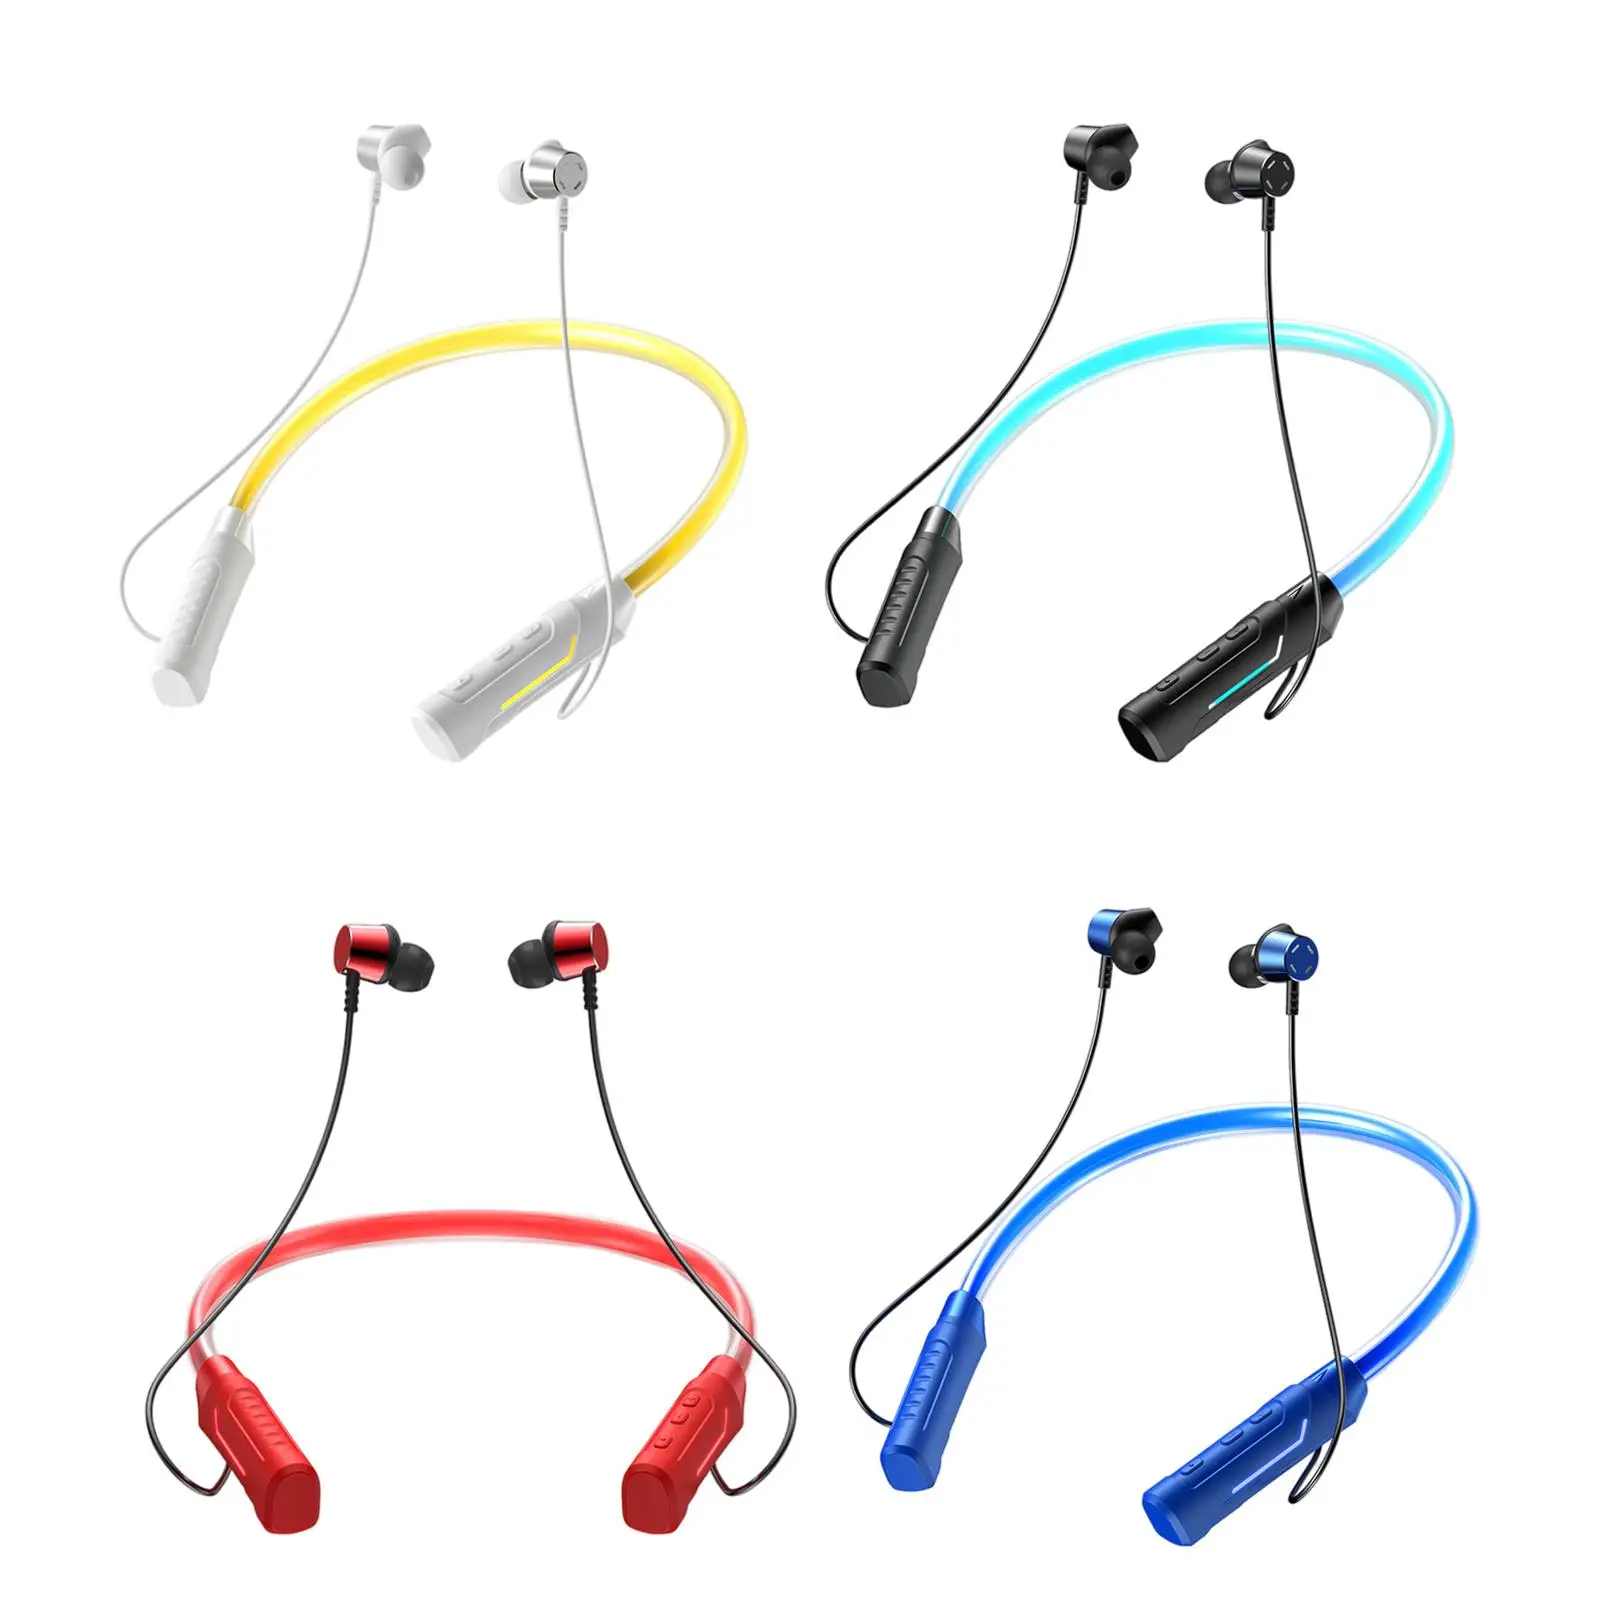  Headphones, Neckband Stereo Earphones RGB 00mAh Sports Headset Sports Earphone for Running Home Jogging Bicycling Driving